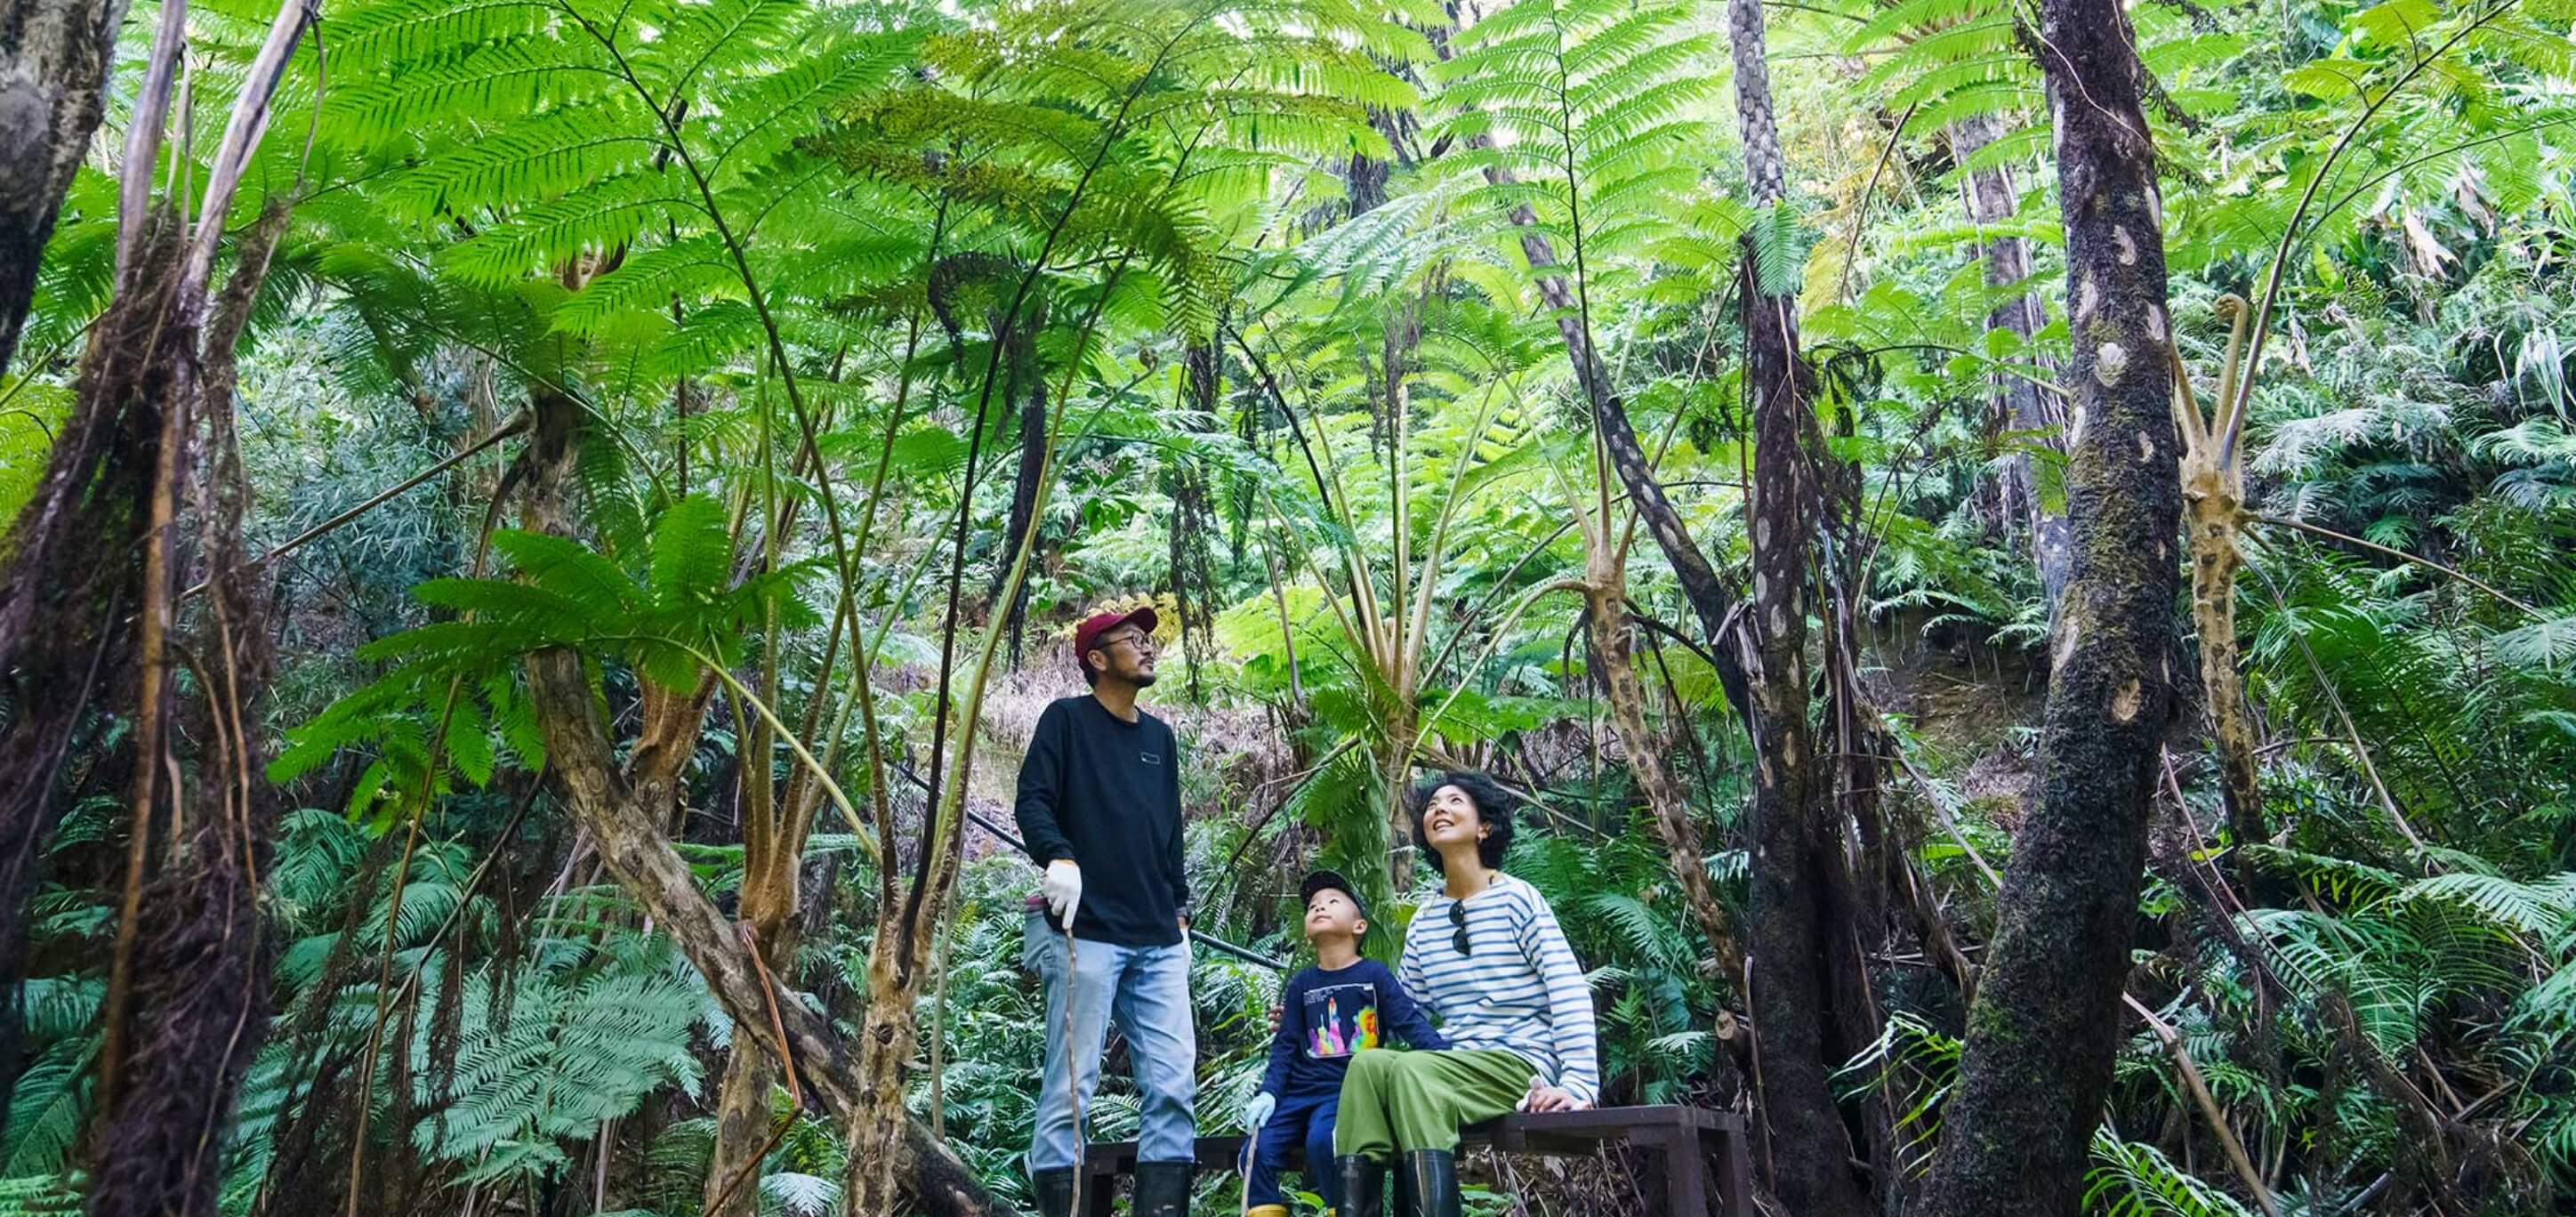 The nature trekking tour gives you a satisfying enjoyment of the Yambaru forest filled with giant ferns.